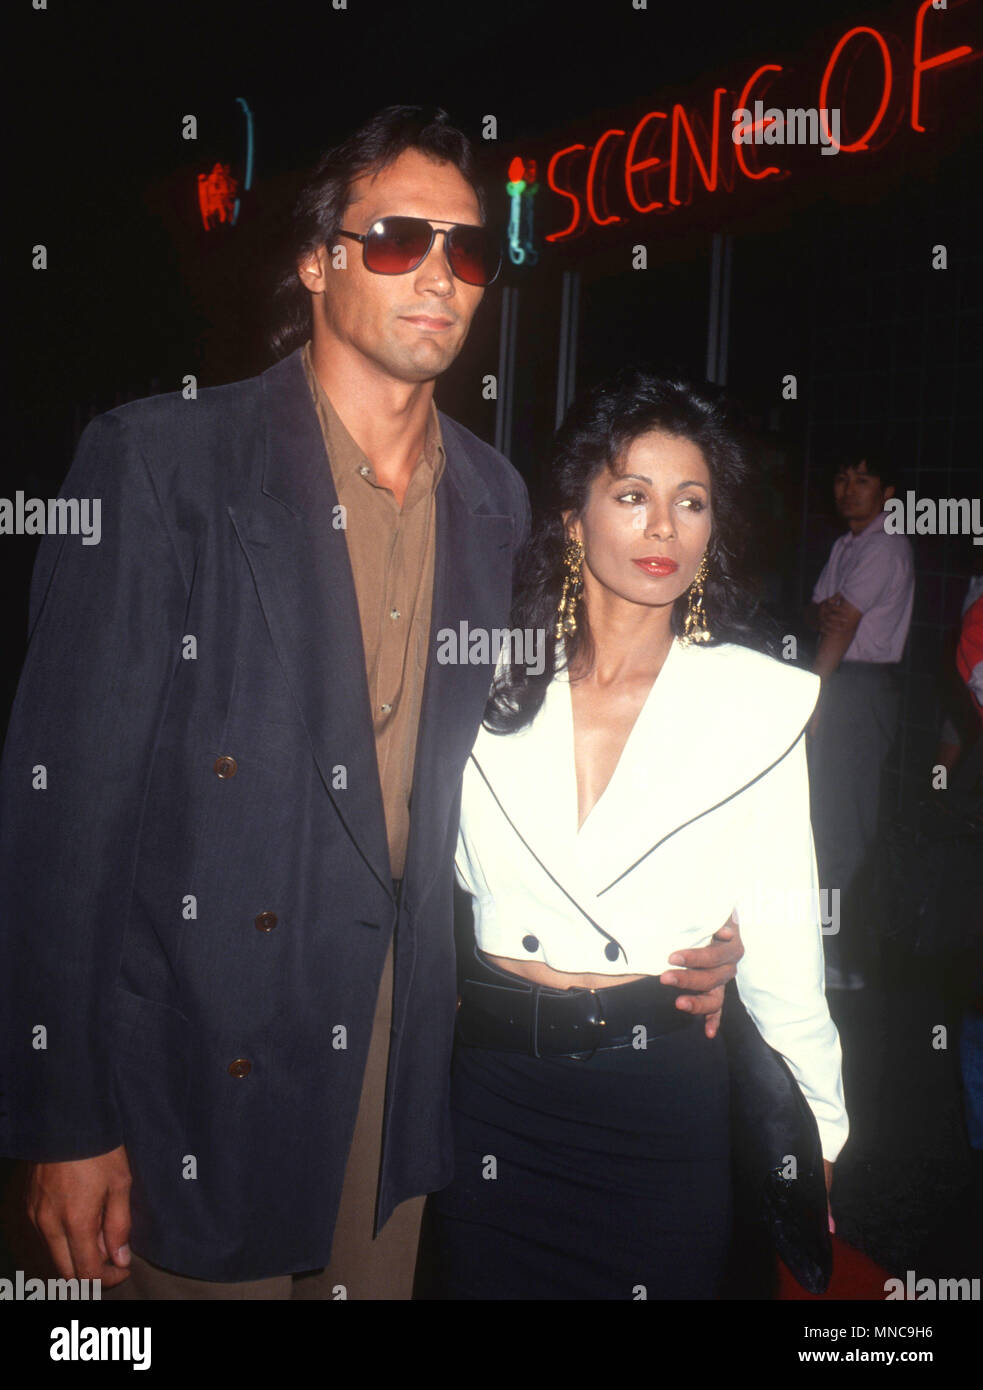 LOS ANGELES, CA - SEPTEMBER 7: Actor Jimmy Smits and wife actress Wanda De Jesus attend Fourth Annual APLA Commitment to Life Benefit on September 7, 1990 at the Wiltern Theater in Los Angeles, California. Photo by Barry King/Alamy Stock Photo Stock Photo